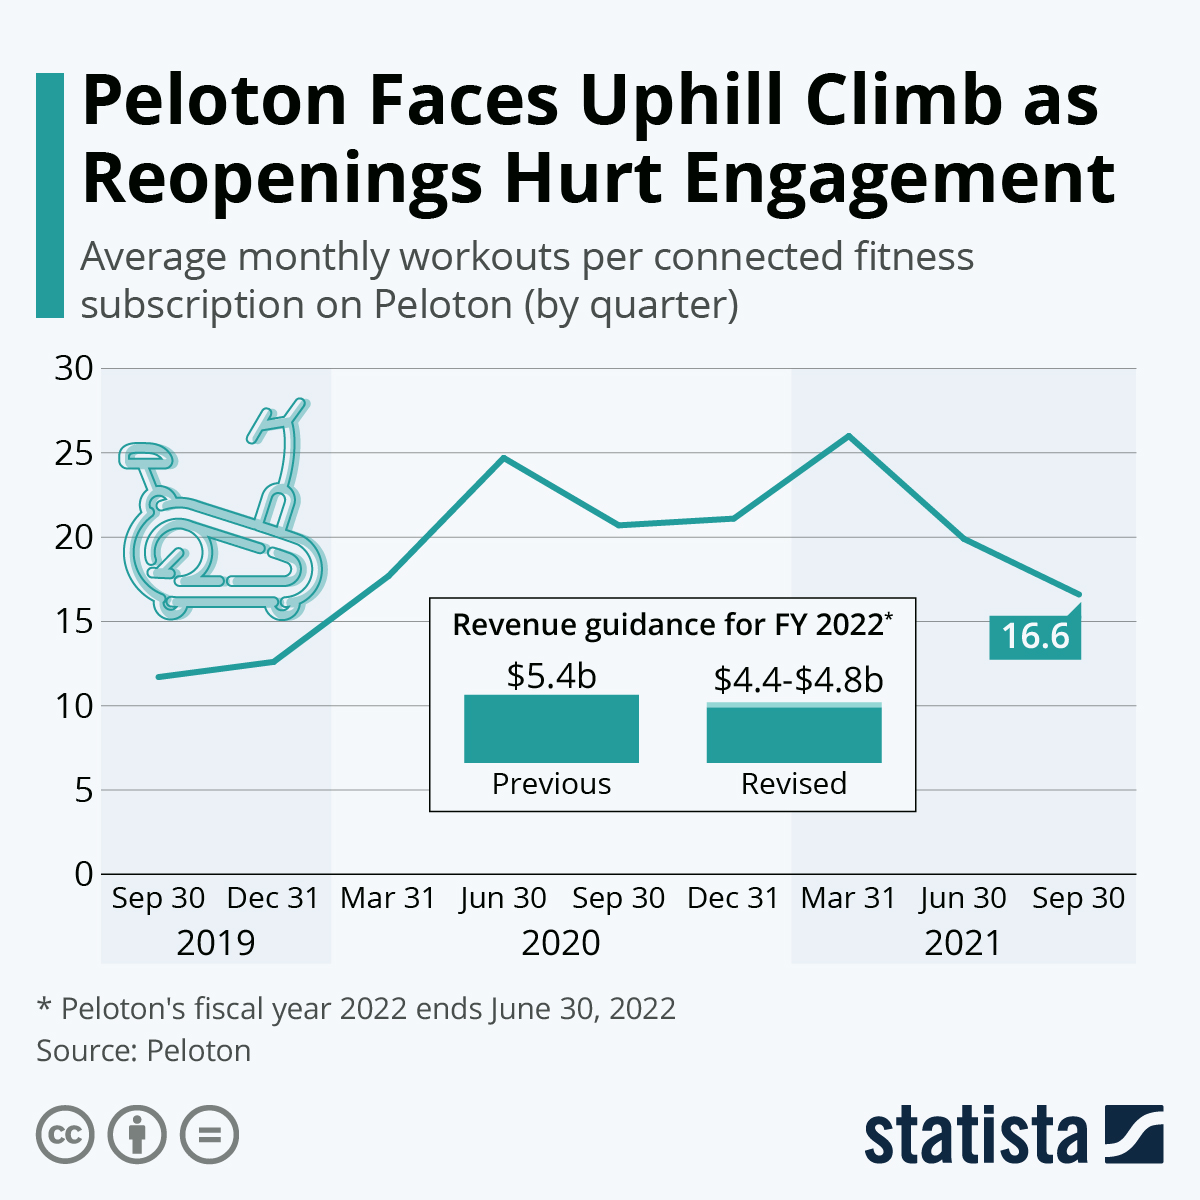 Peloton Faces Uphill Climb as Reopenings Hurt Engagement